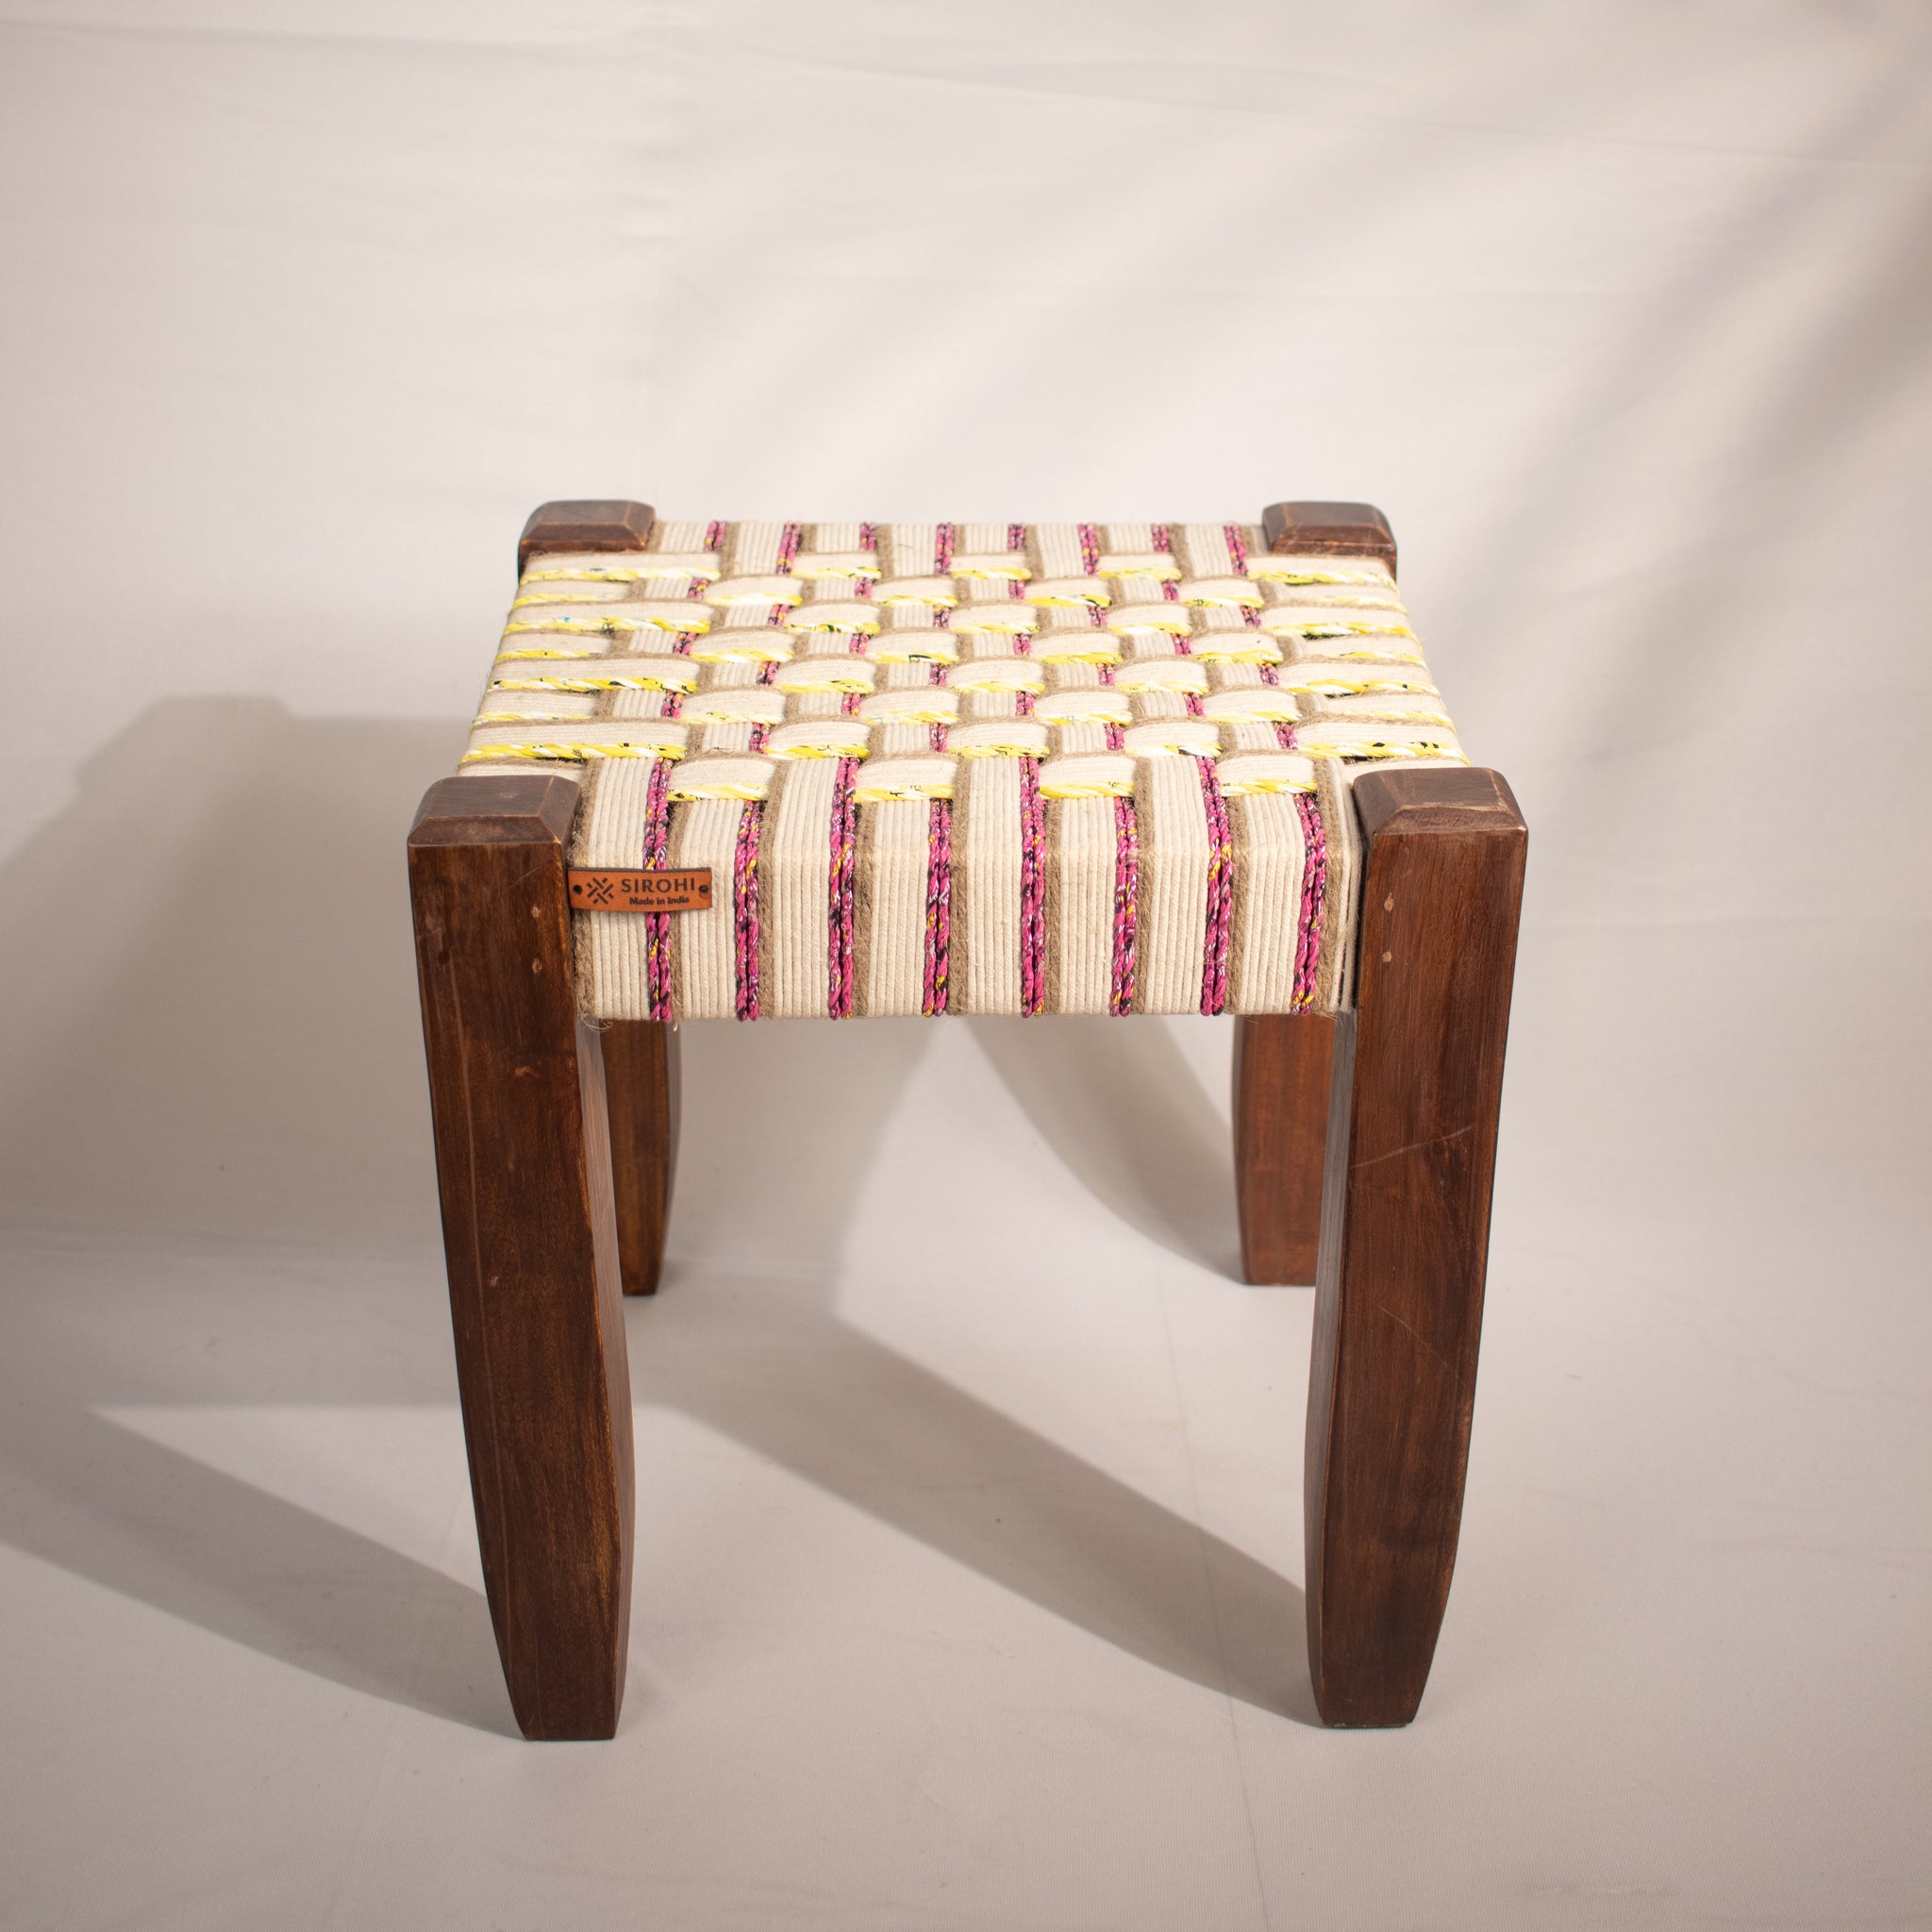 White, yellow and pink wooden stool